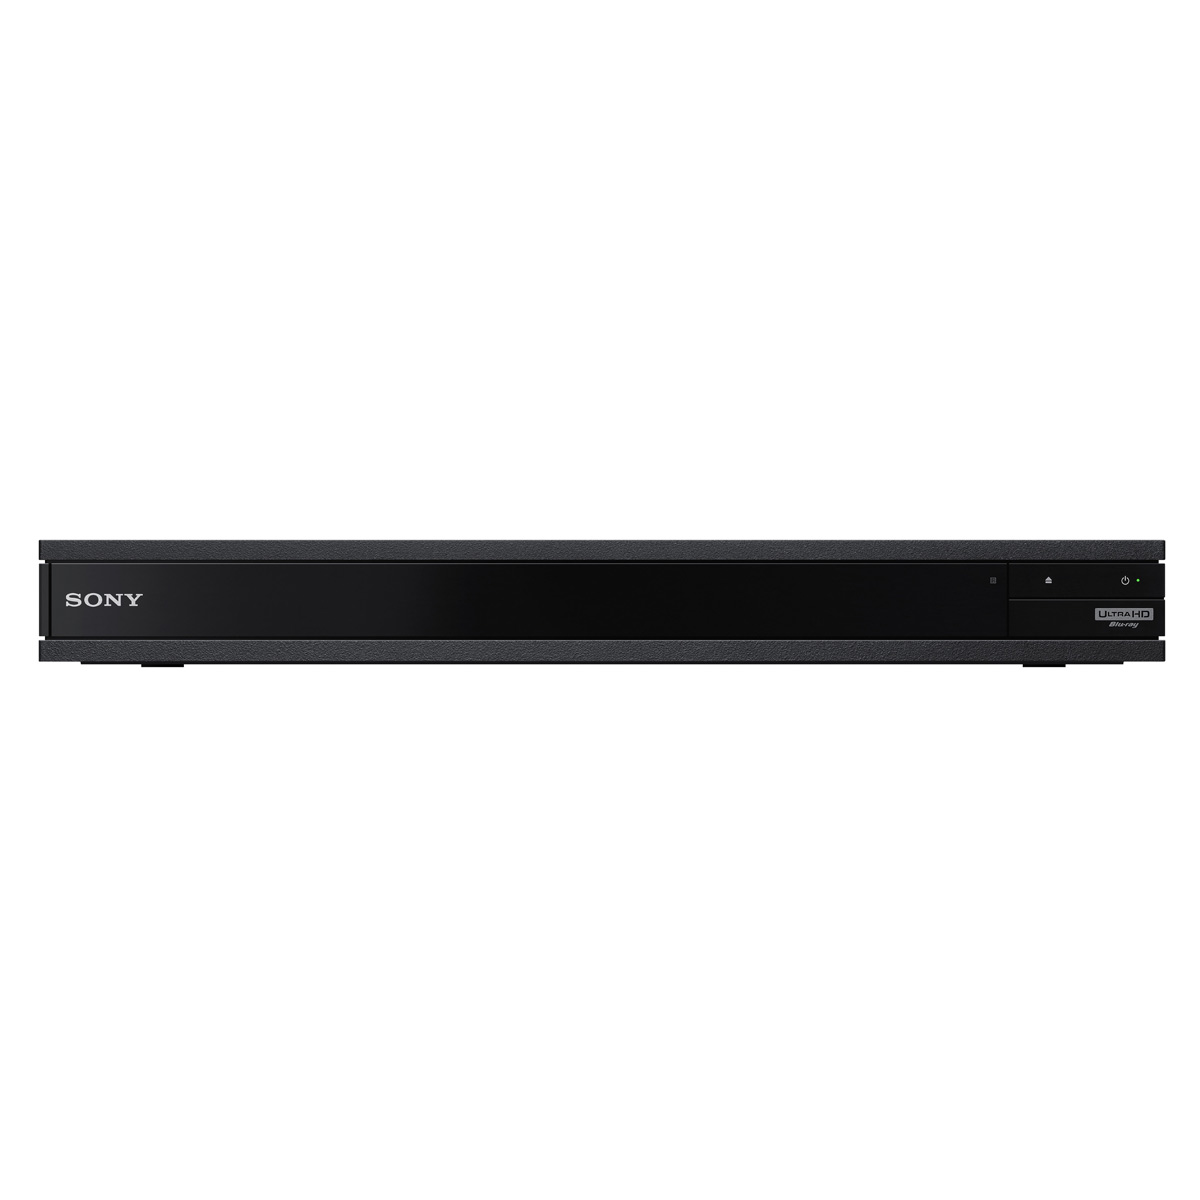 Sony UBP-X800M2 4K Ultra HD Home Theater Streaming Blu-Ray Player with High-Resolution Audio and Wi-Fi Built-In - image 2 of 6